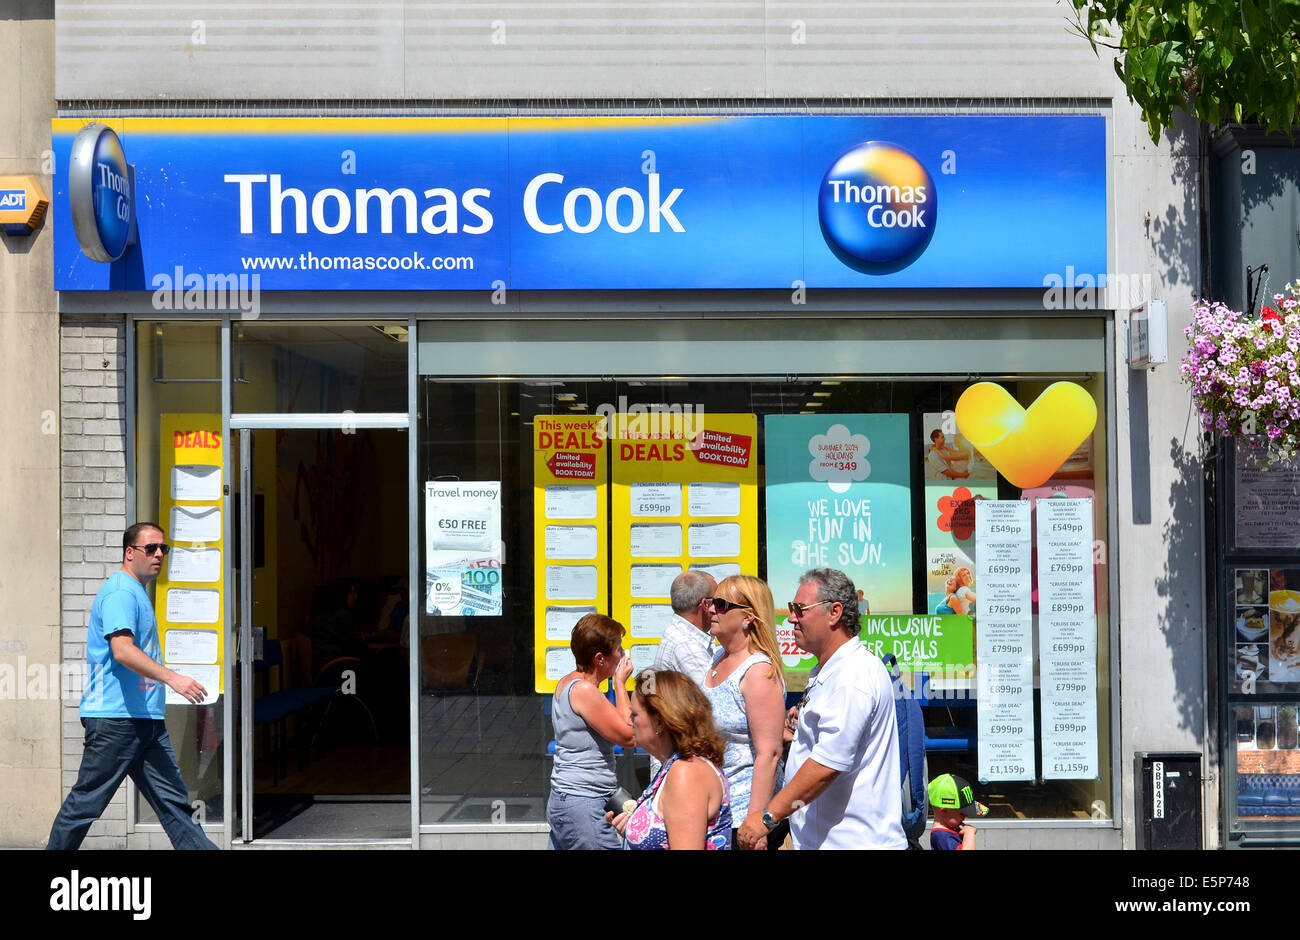 A Thomas Cook travel agency in a UK high street Stock Photo